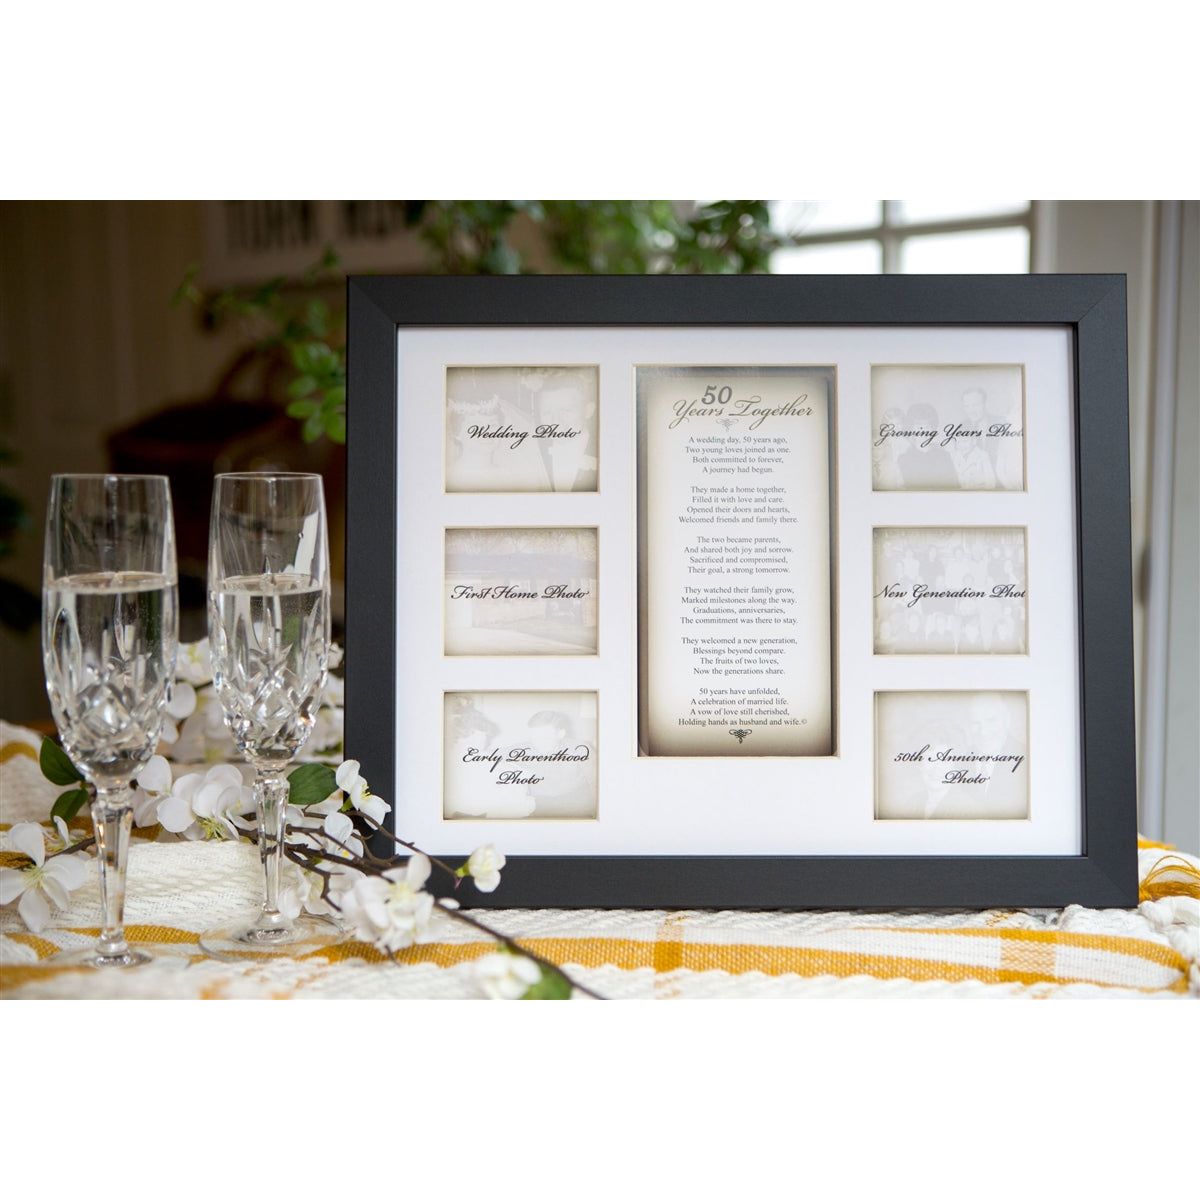 50 Years Together Frame on a table in a 50th wedding anniversary party setting